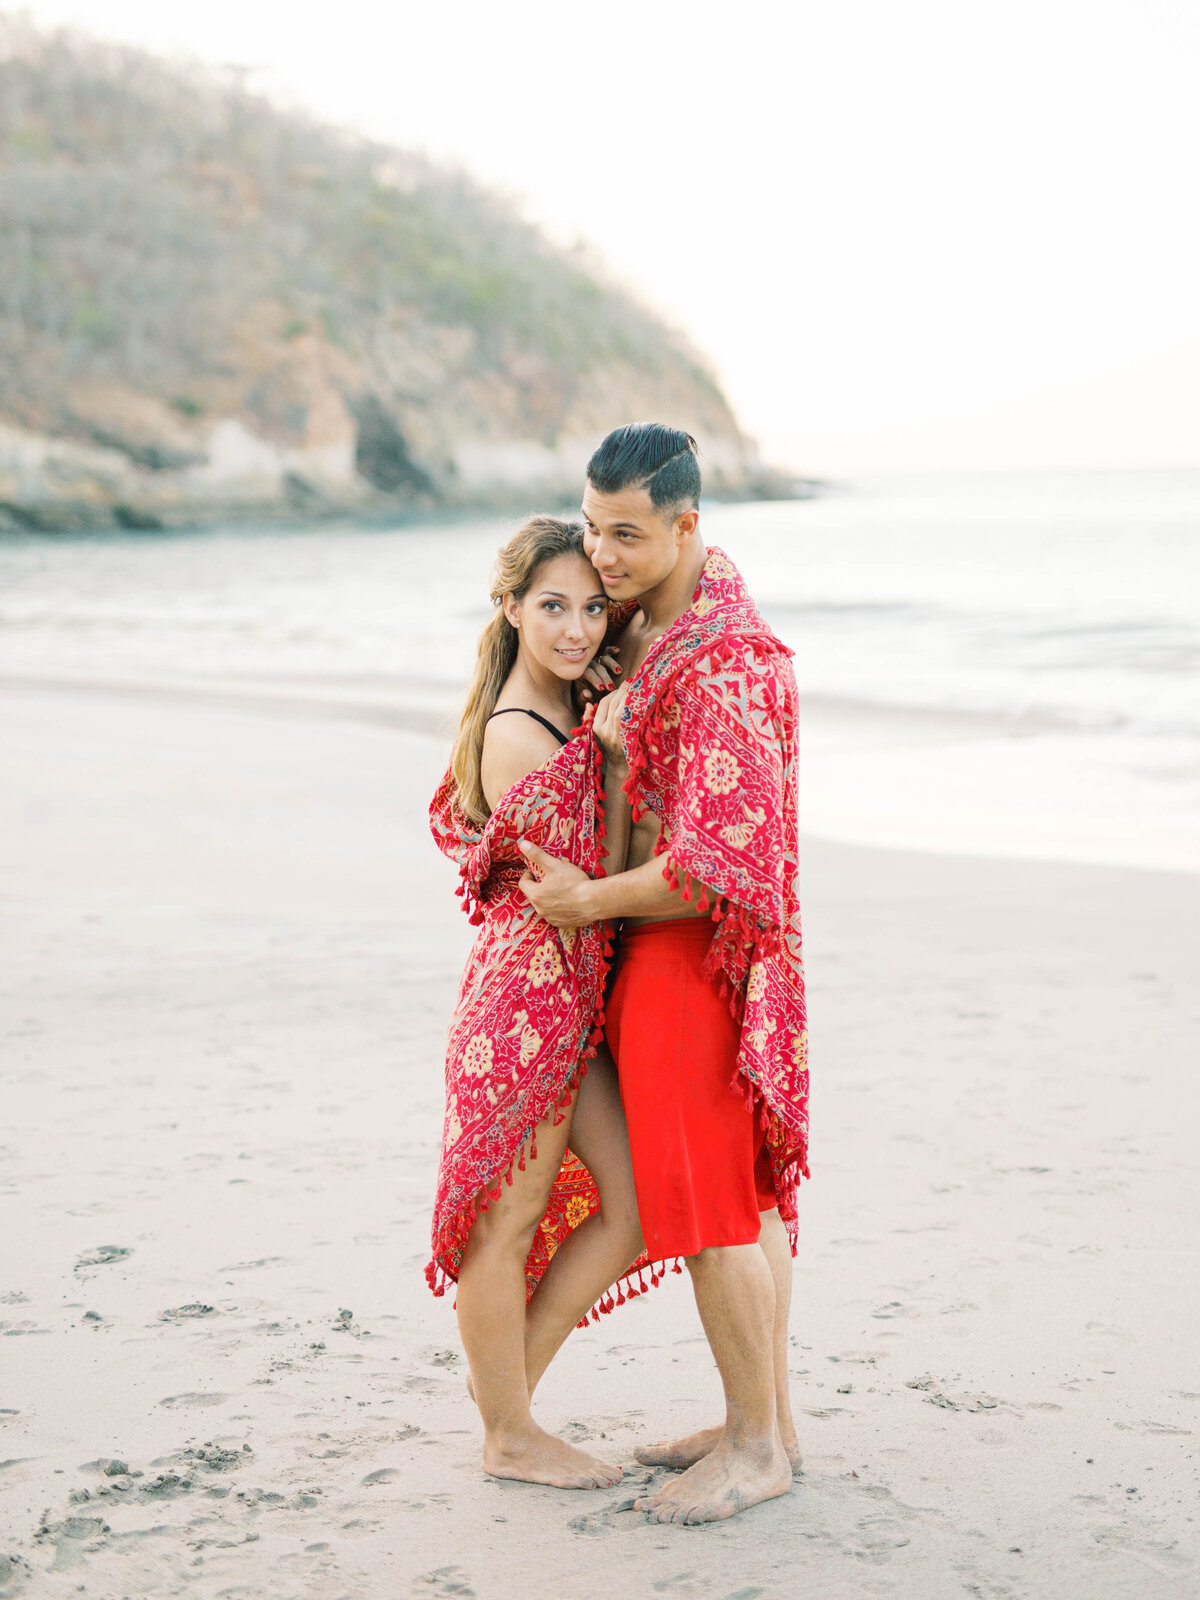 A Beach Engagement Session in Tamarindo, Costa Rica 1417